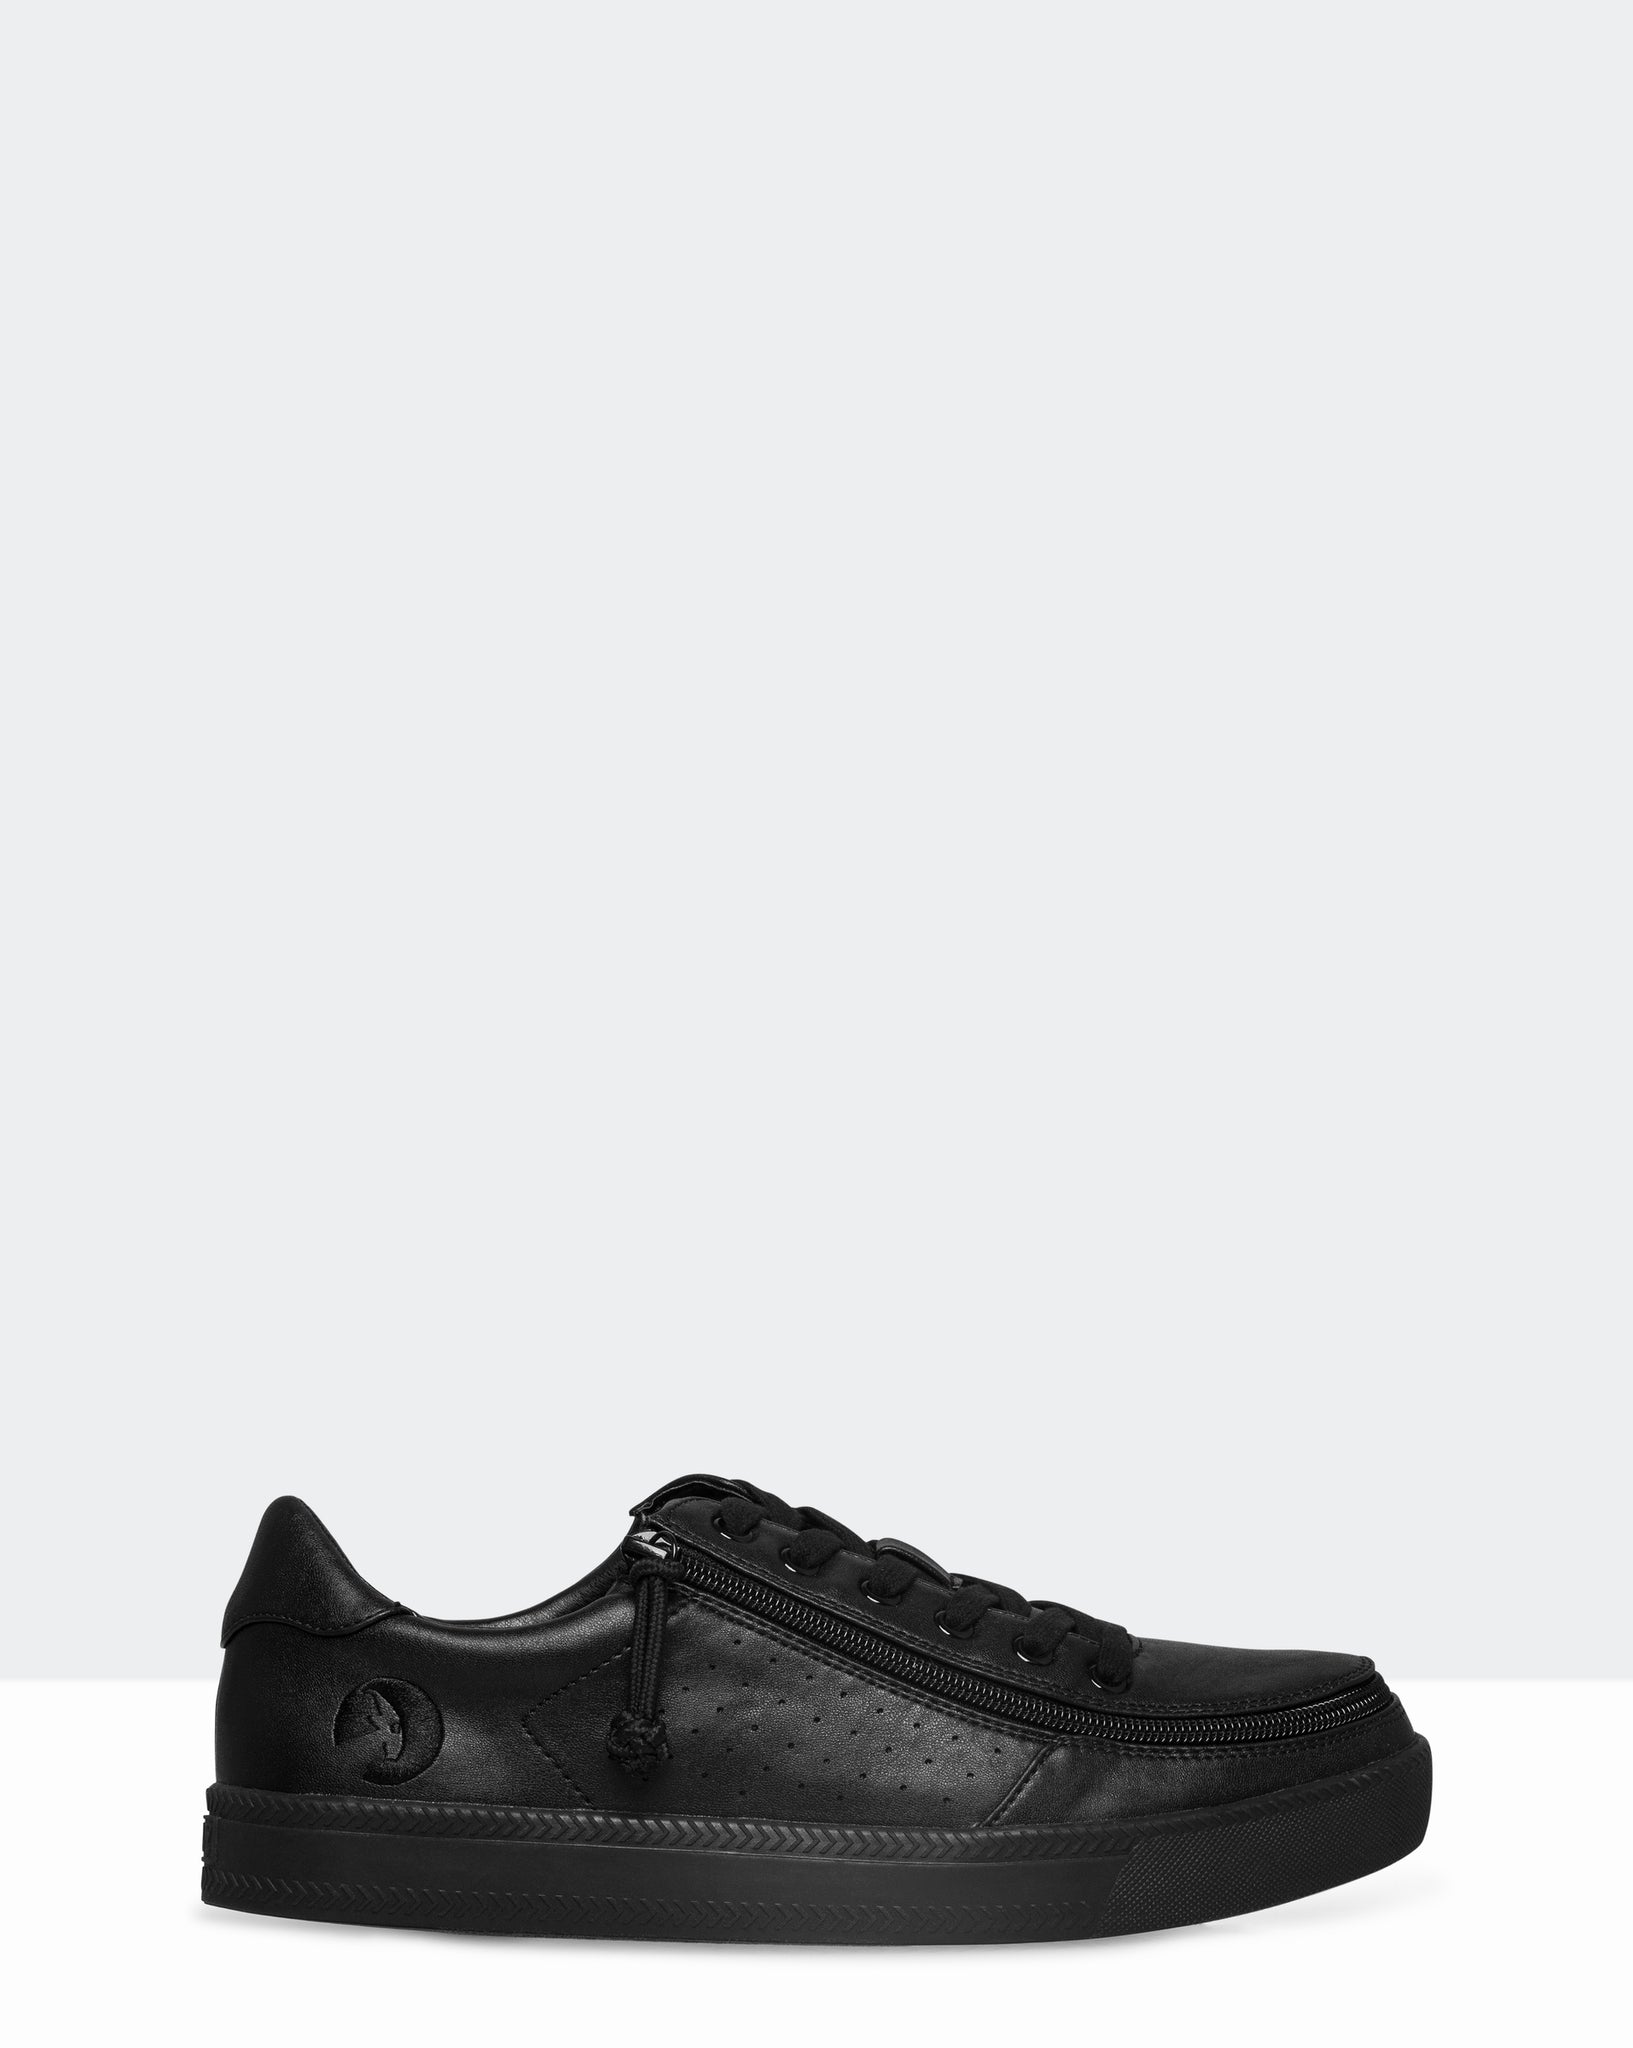 Low Rise Sneaker (Men) - Black to the Floor Faux Leather